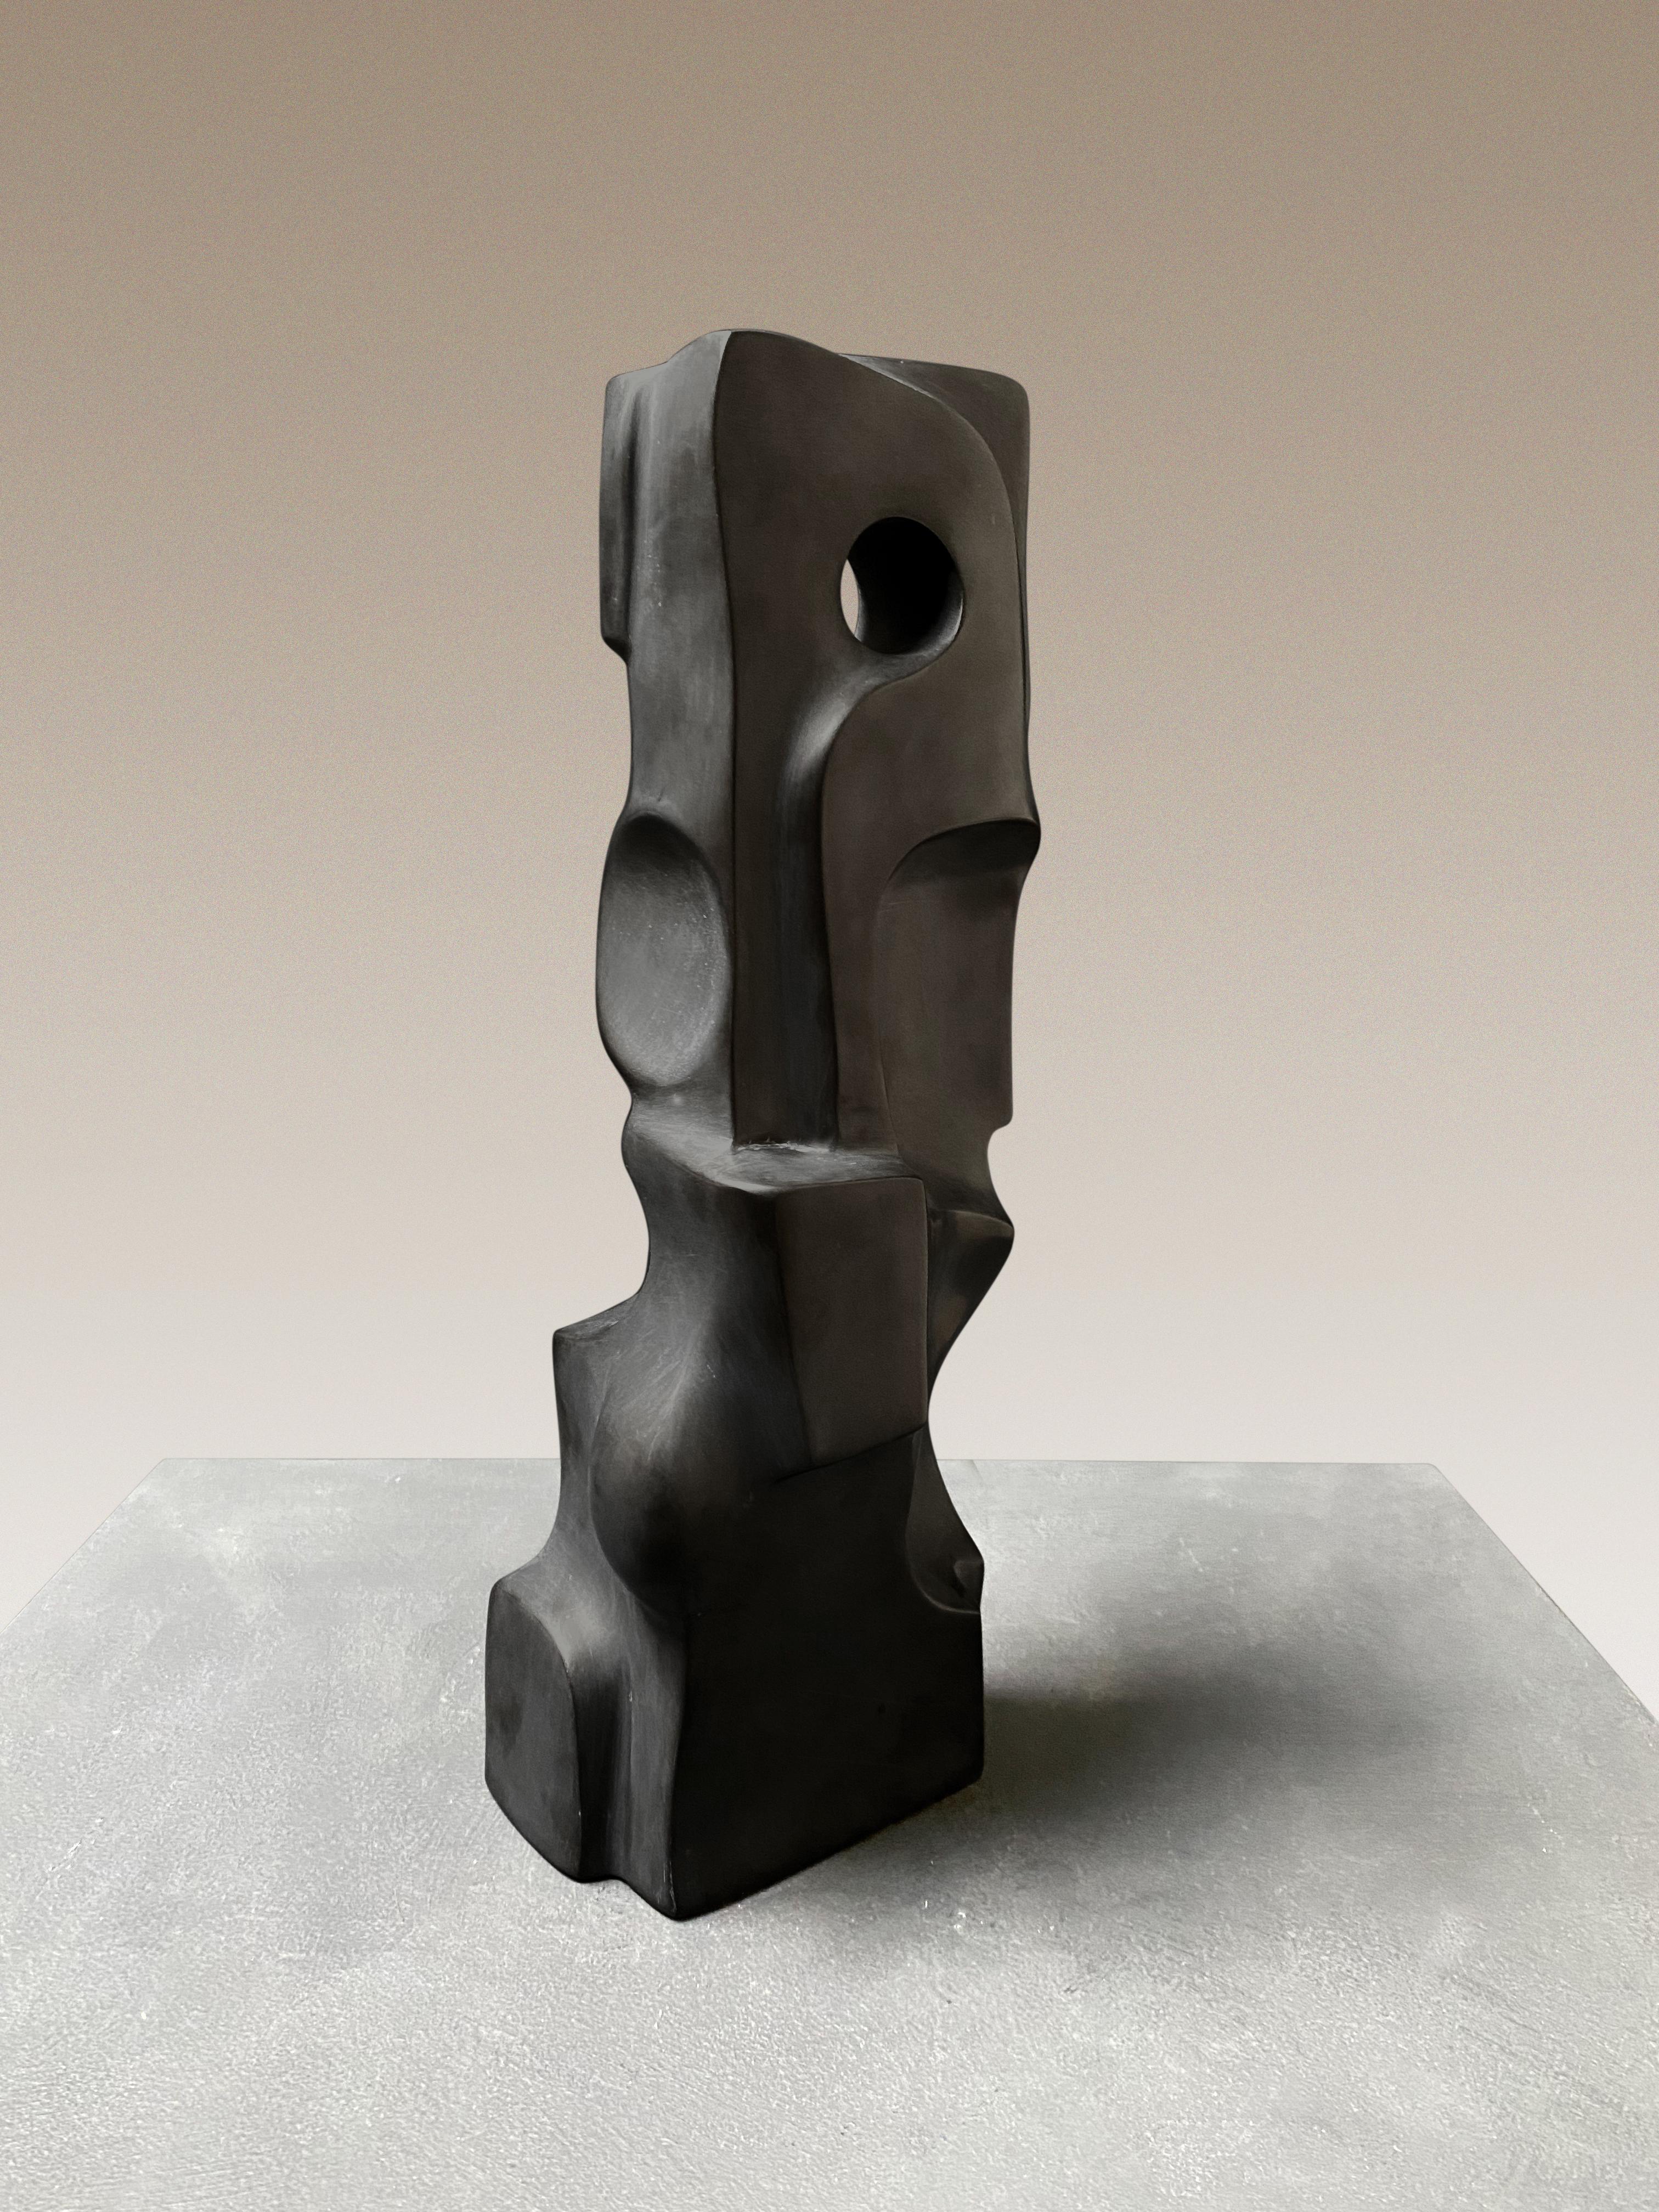 Citadel, Black Belgian Marble, 2021 by Yoko Kubrick.
Geometric and organic flowing lines, carved into a marble block with a matte finish. 

Kubrick’s work uses abstracted natural forms—the curve of a petal, the undulations of the sea, the ridge of a